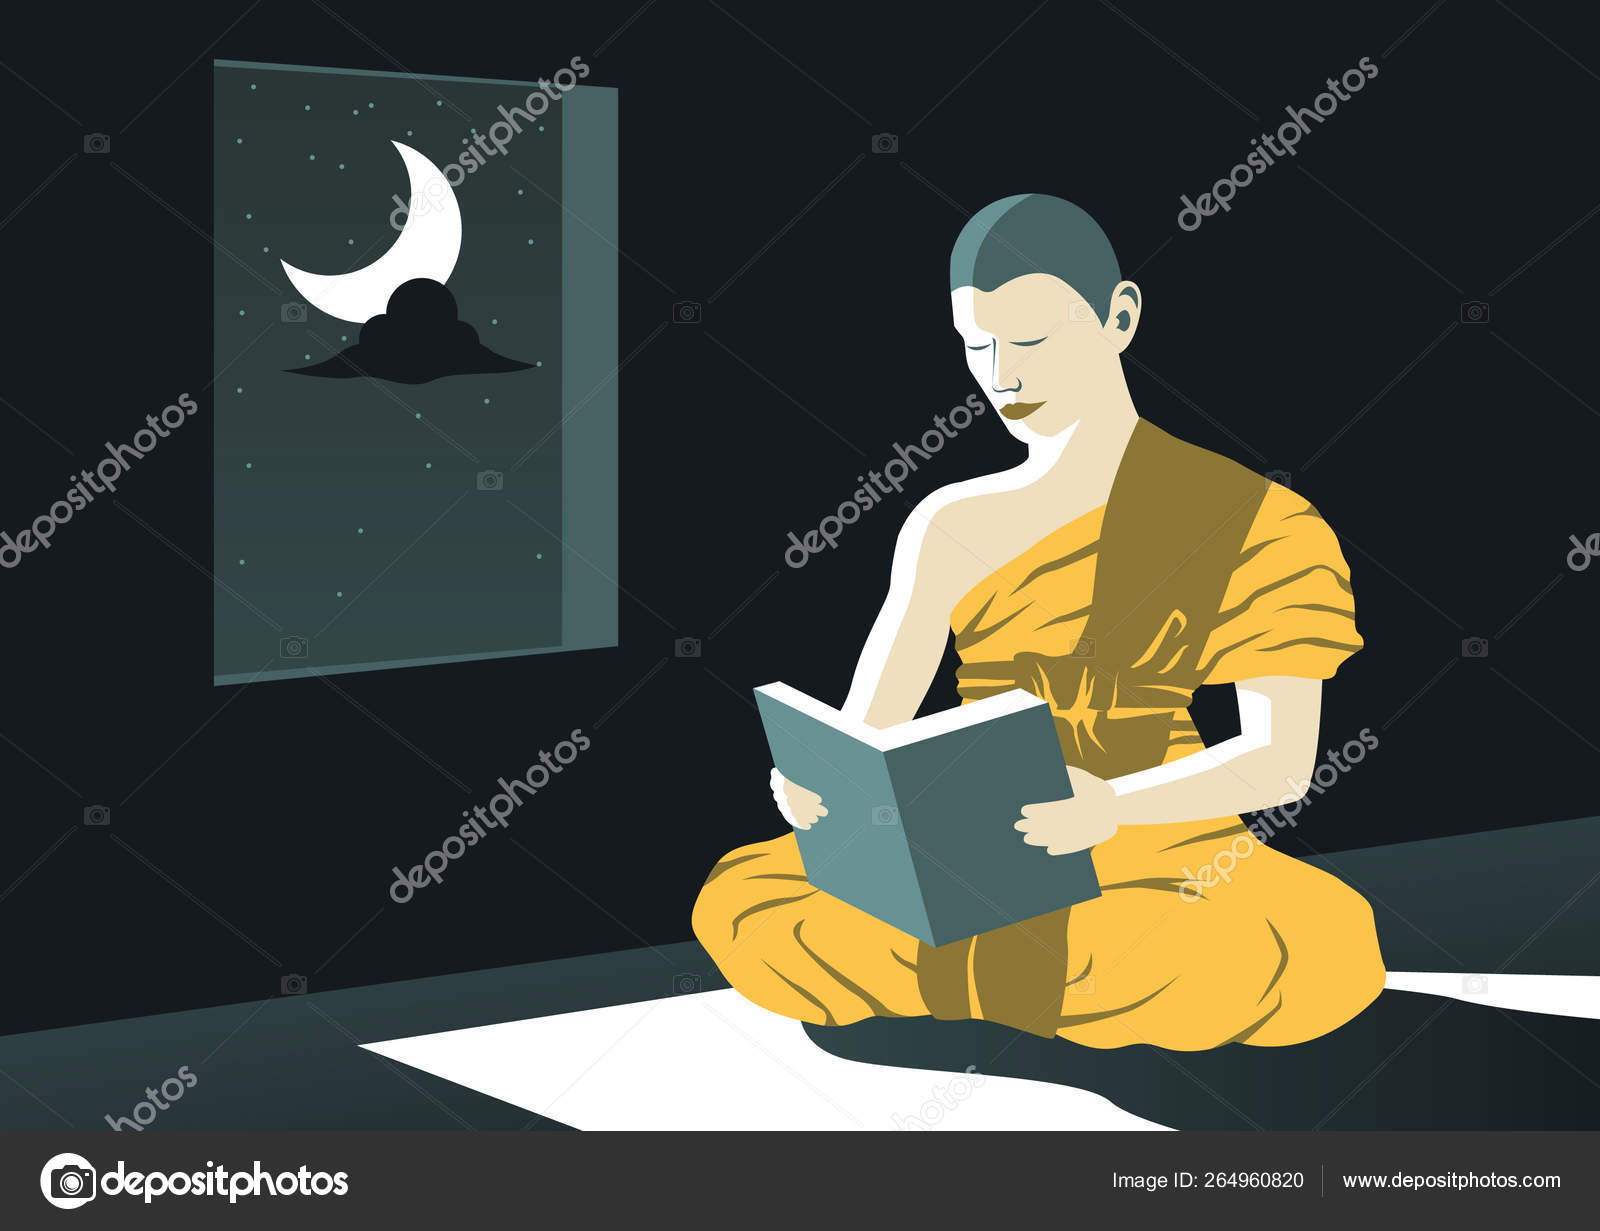 How Do You Read A Book At Night